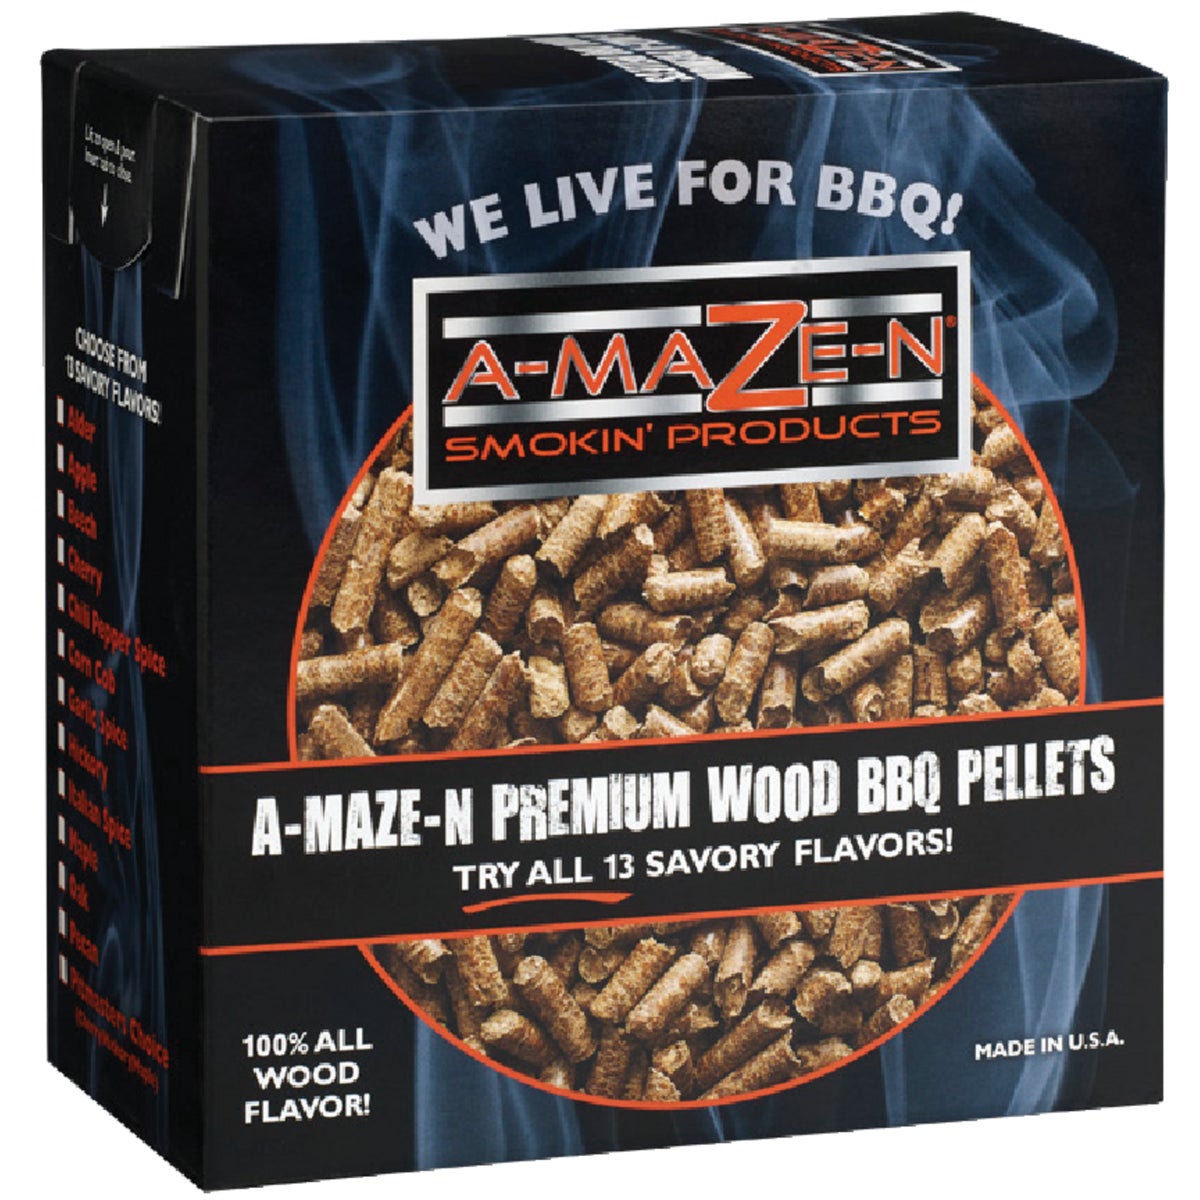 Item 802001, Wood pellets are made from 100% flavored wood with no added fillers, 